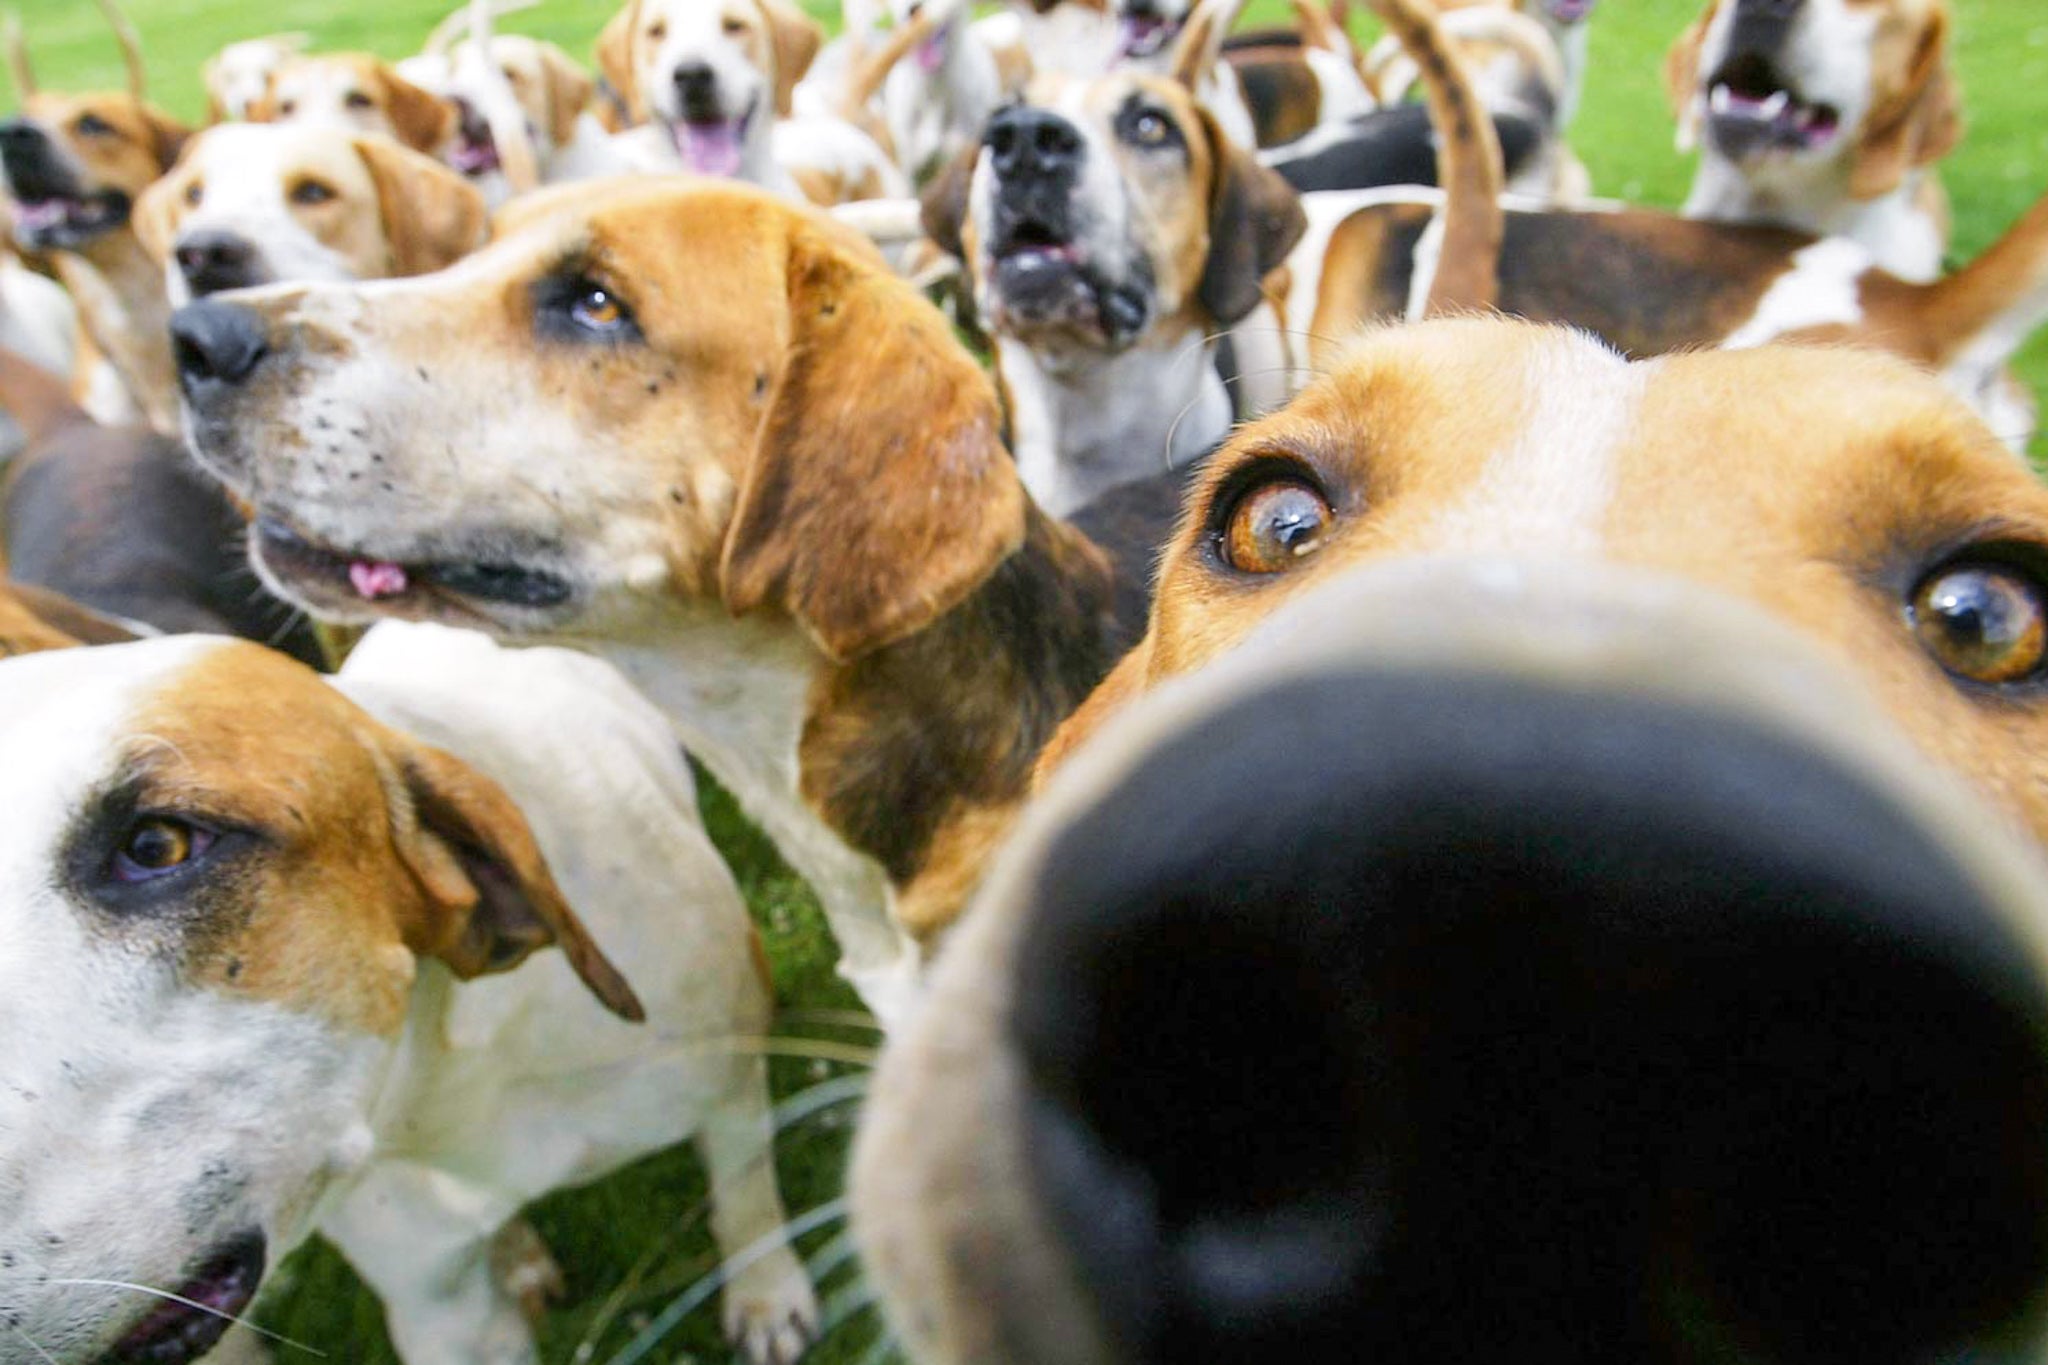 A ground of hound dogs swamp the camera.